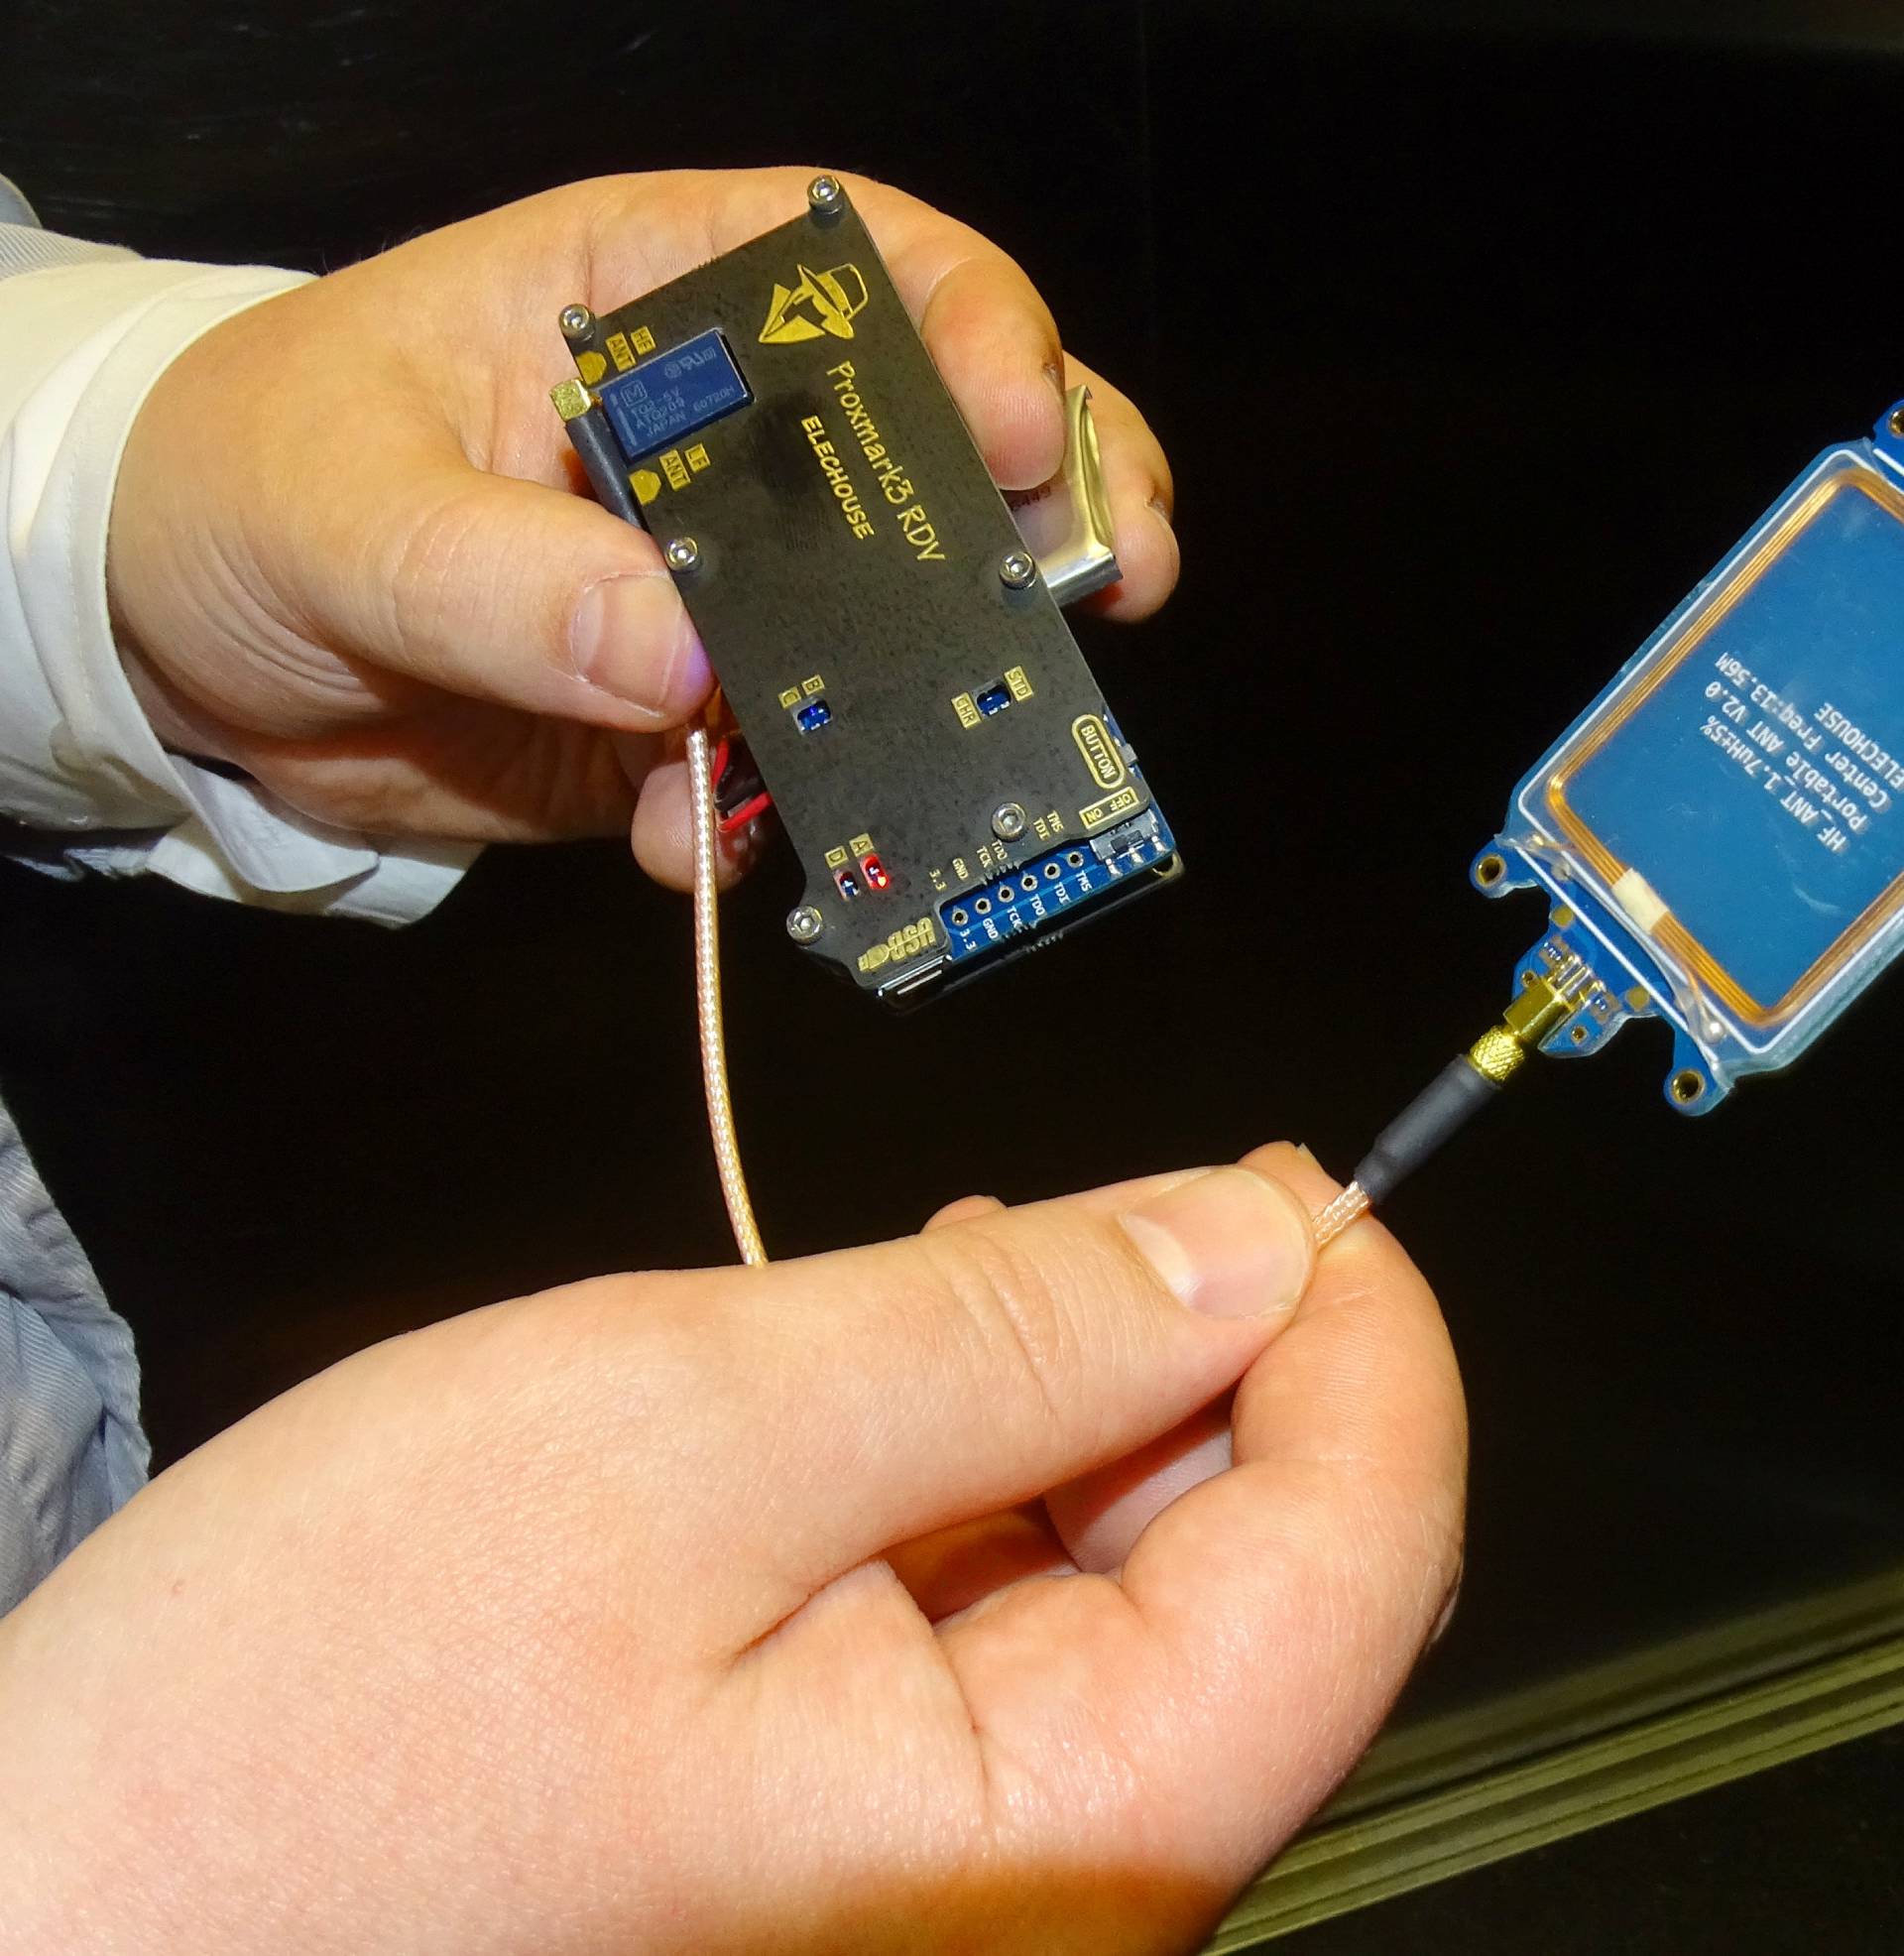 F-Secure researcher Hirvonen shows a device that is able to create a master key out of a single hotel key card in Helsinki